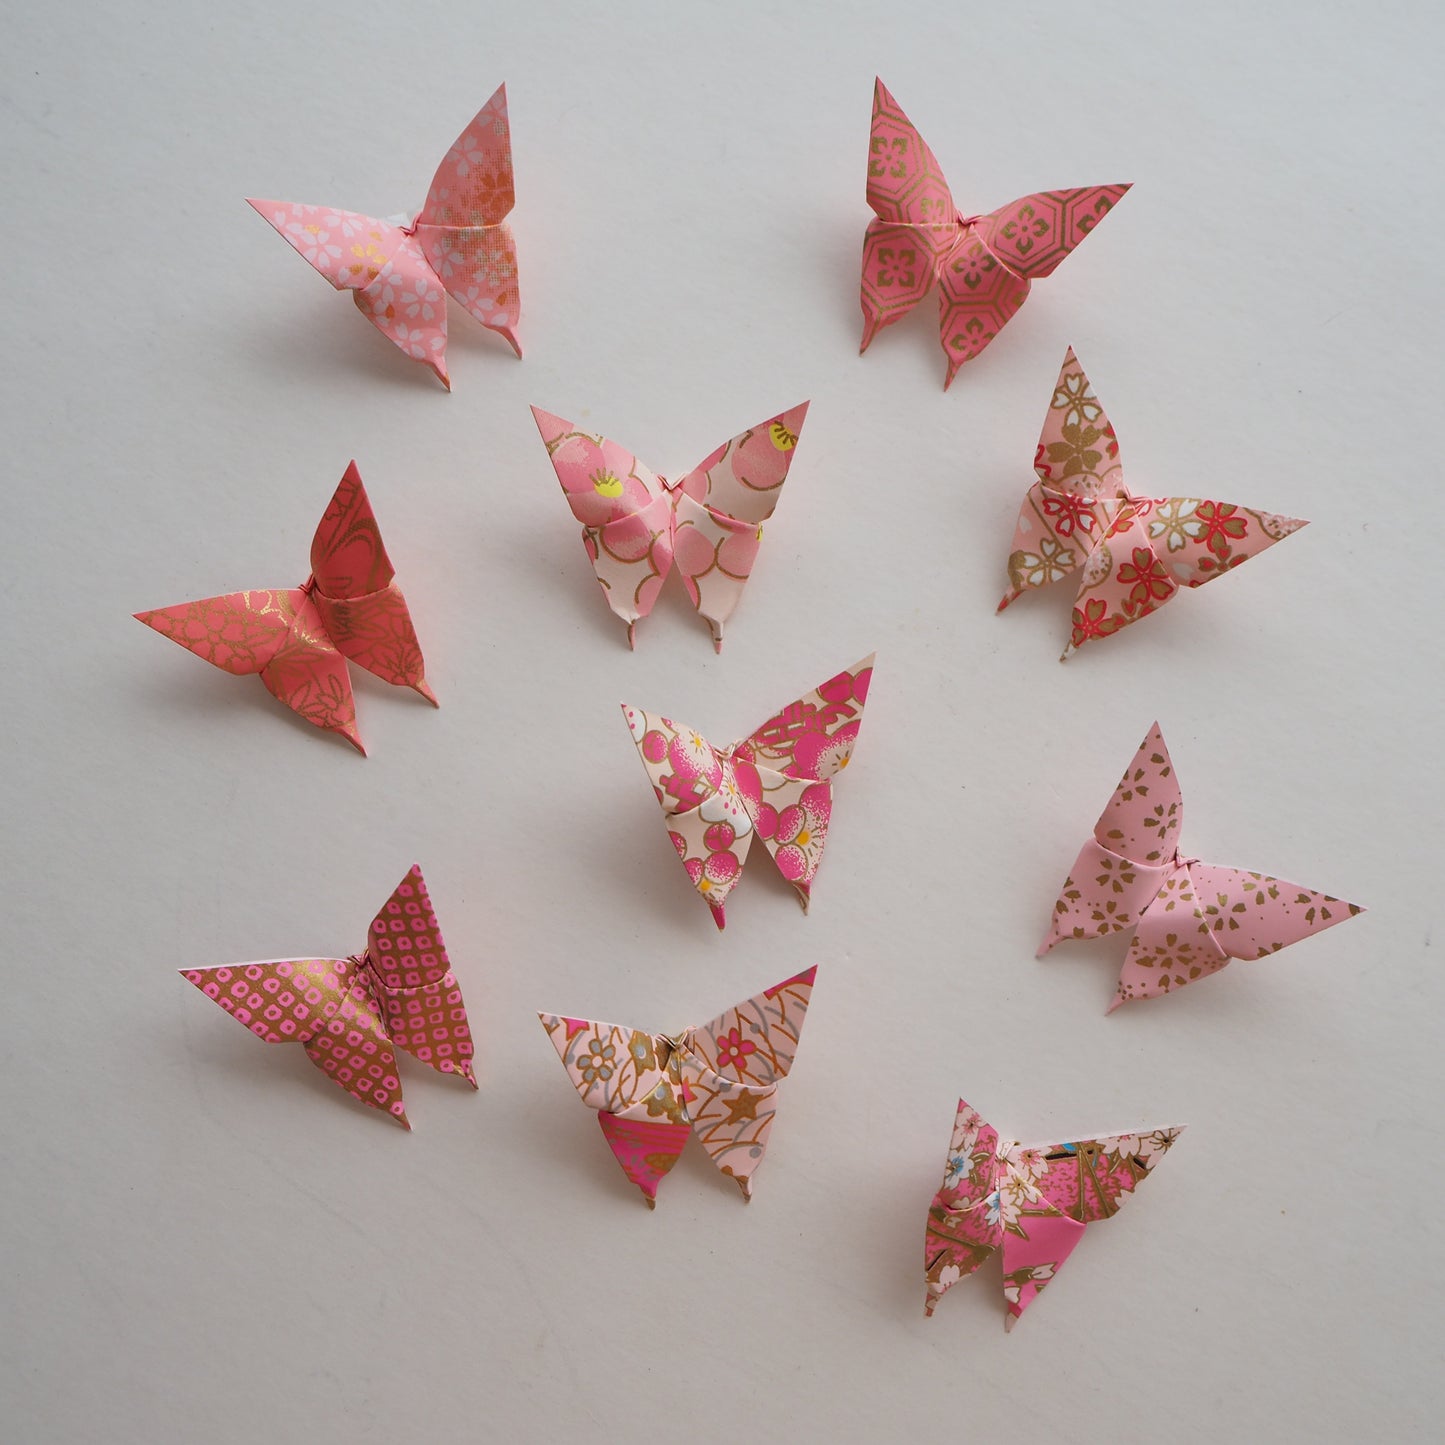 Pack of 10 Origami Paper Butterflies - Pink